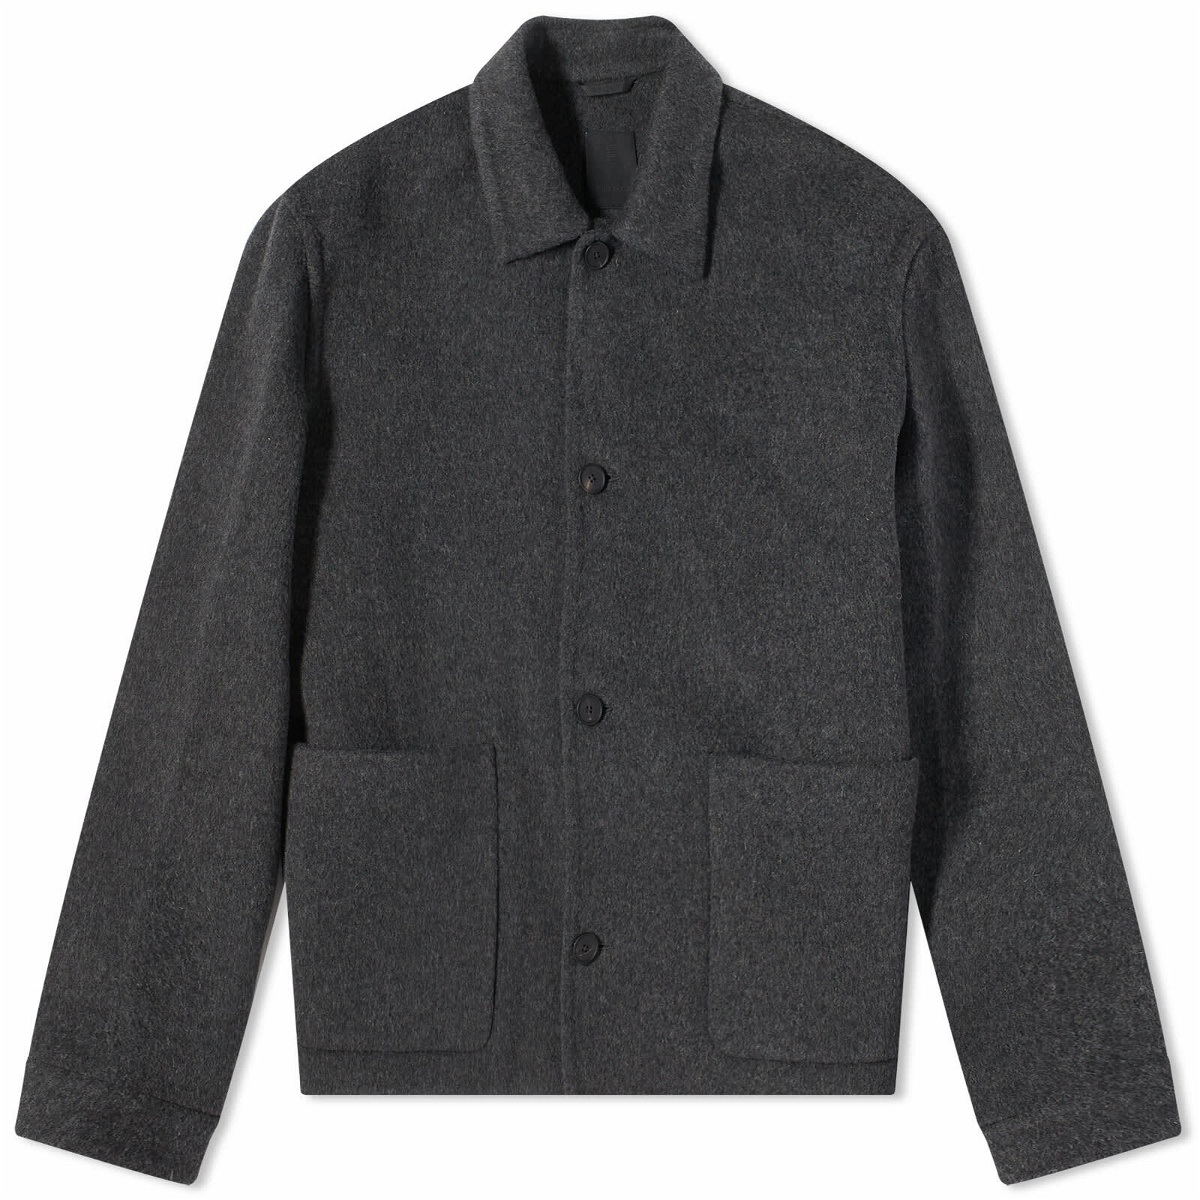 Givenchy Men's Double Face Wool Jacket in Dark Grey Givenchy